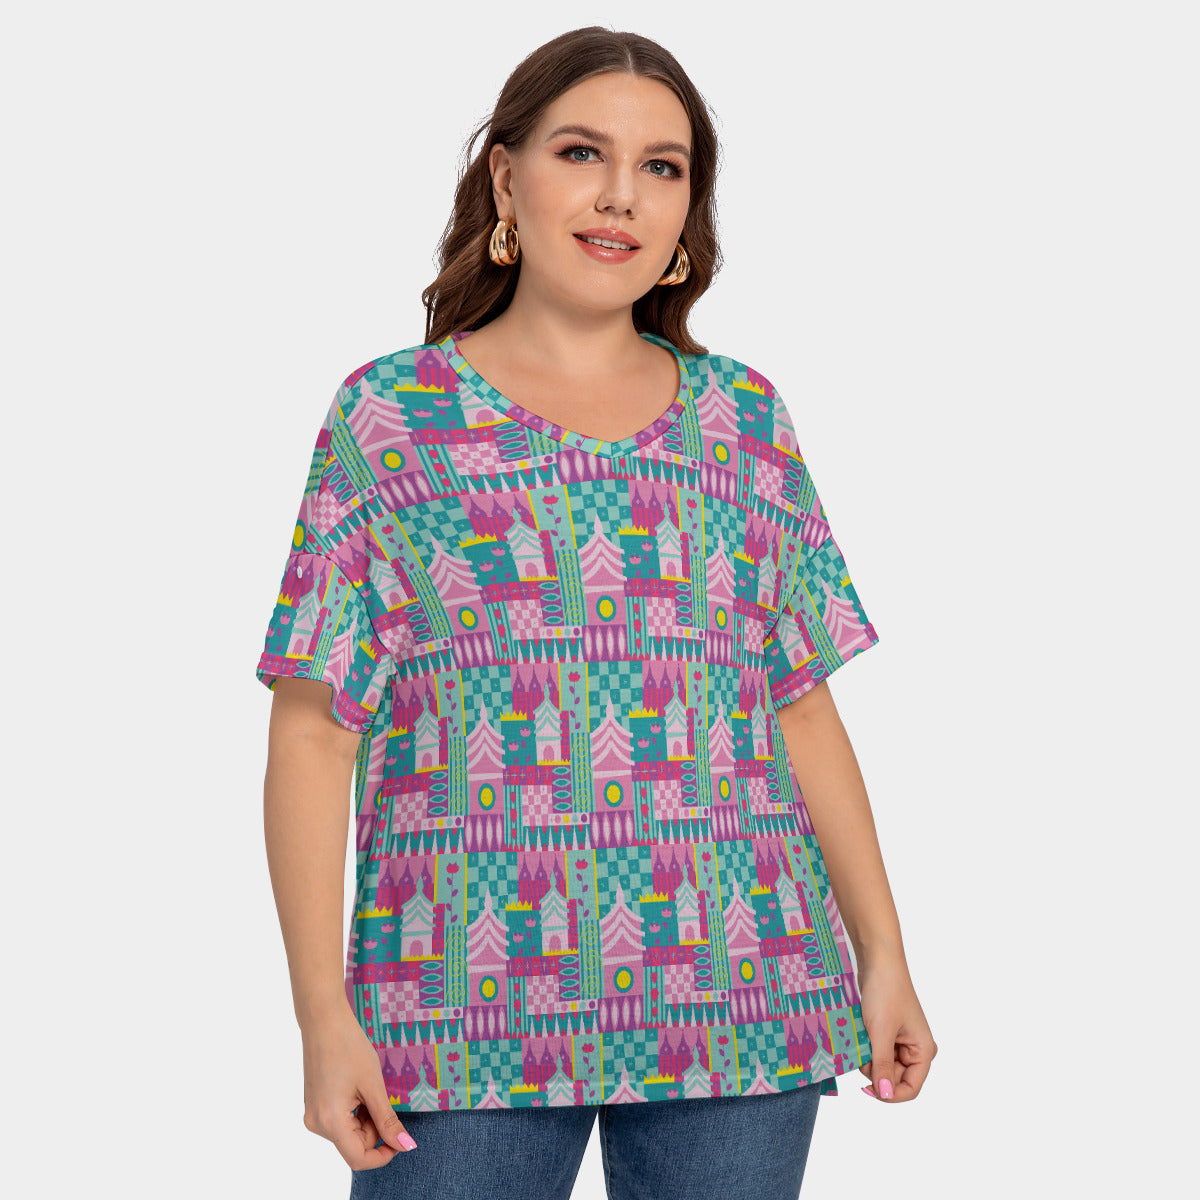 Small World Women's Plus Size Short Sleeve T-shirt With Sleeve Loops